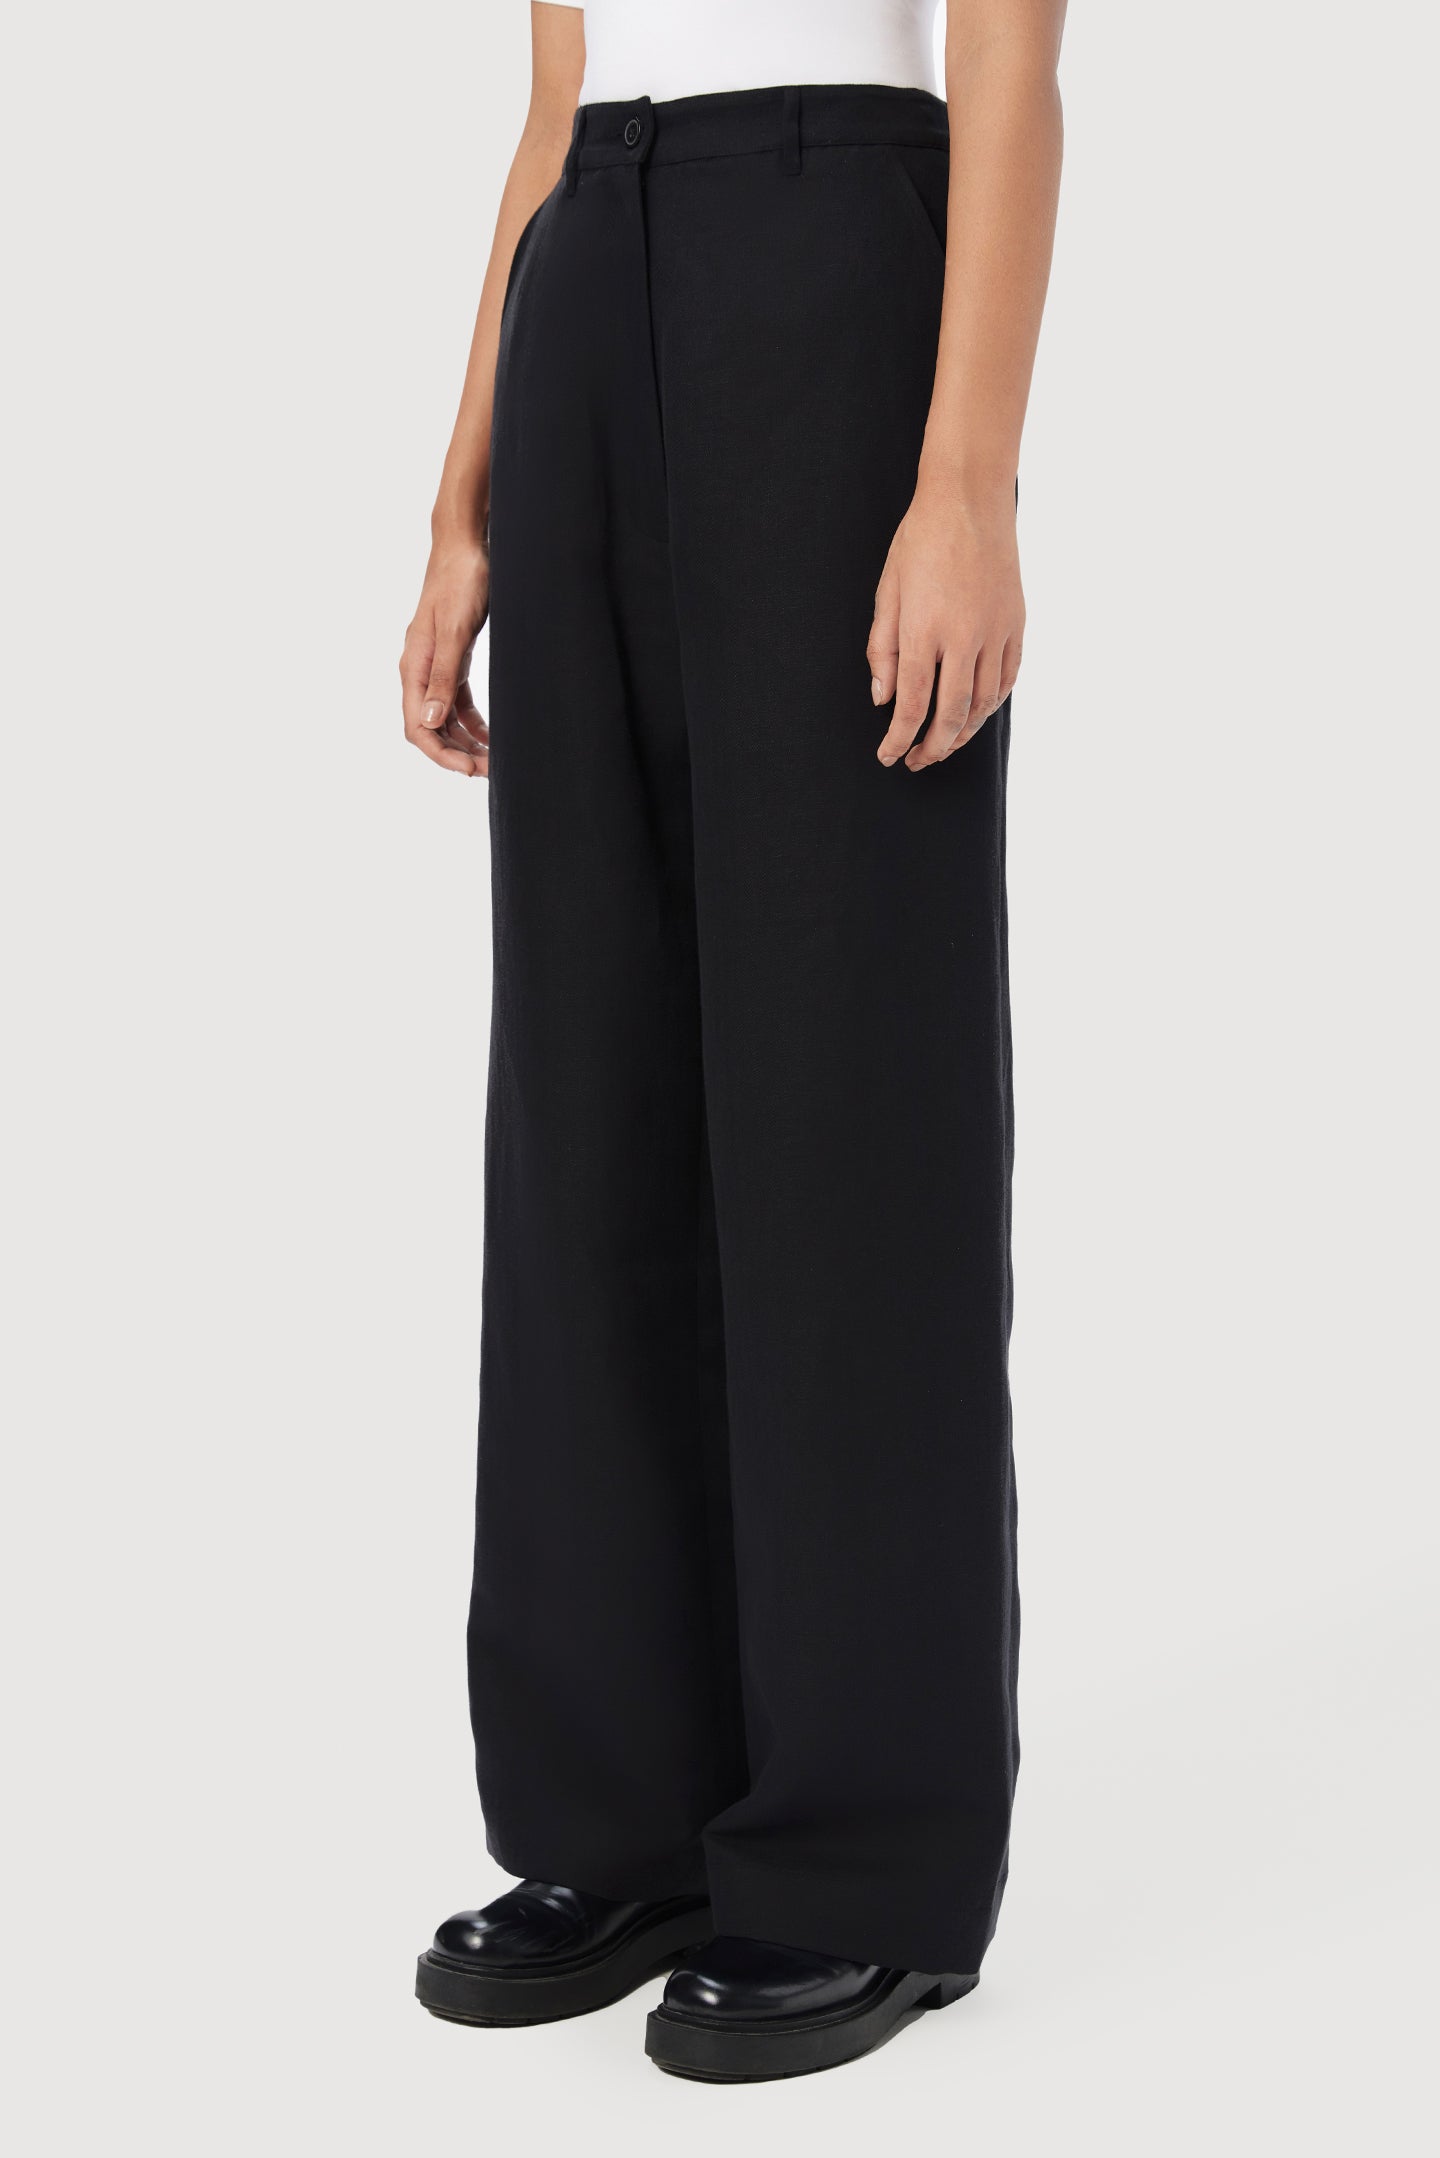 Easy Fit Flared Trousers with Stylish Bone Pocket Detail on the Back